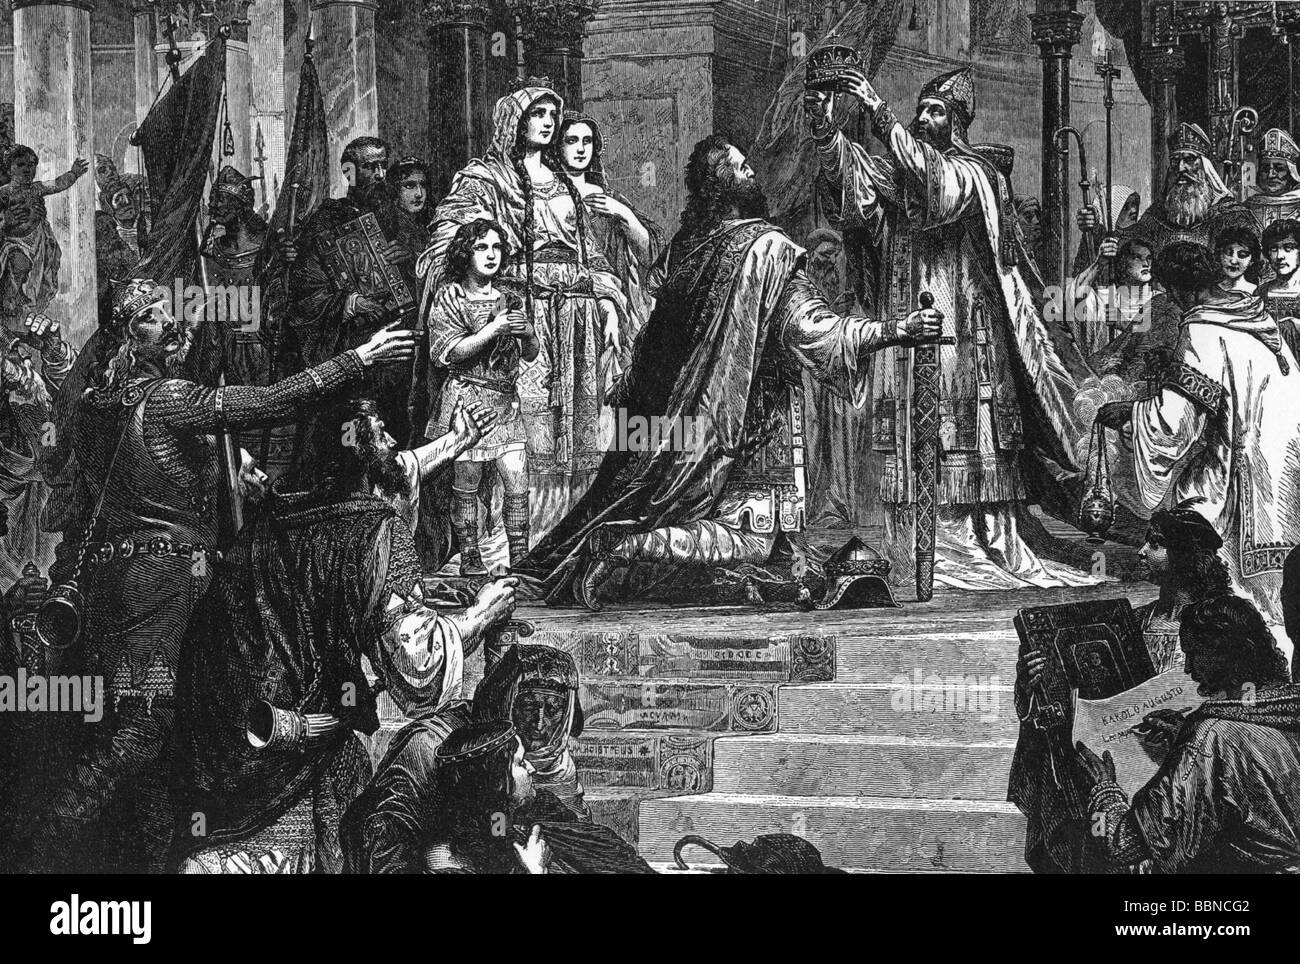 Charlemagne, 2.4.742 - 28.1.814, Roman Emperor 800 - 814, King of the Franks 768 - 814, coronation as emperor by Pope Leo III in Rome, wood engraving, 19th century, Stock Photo